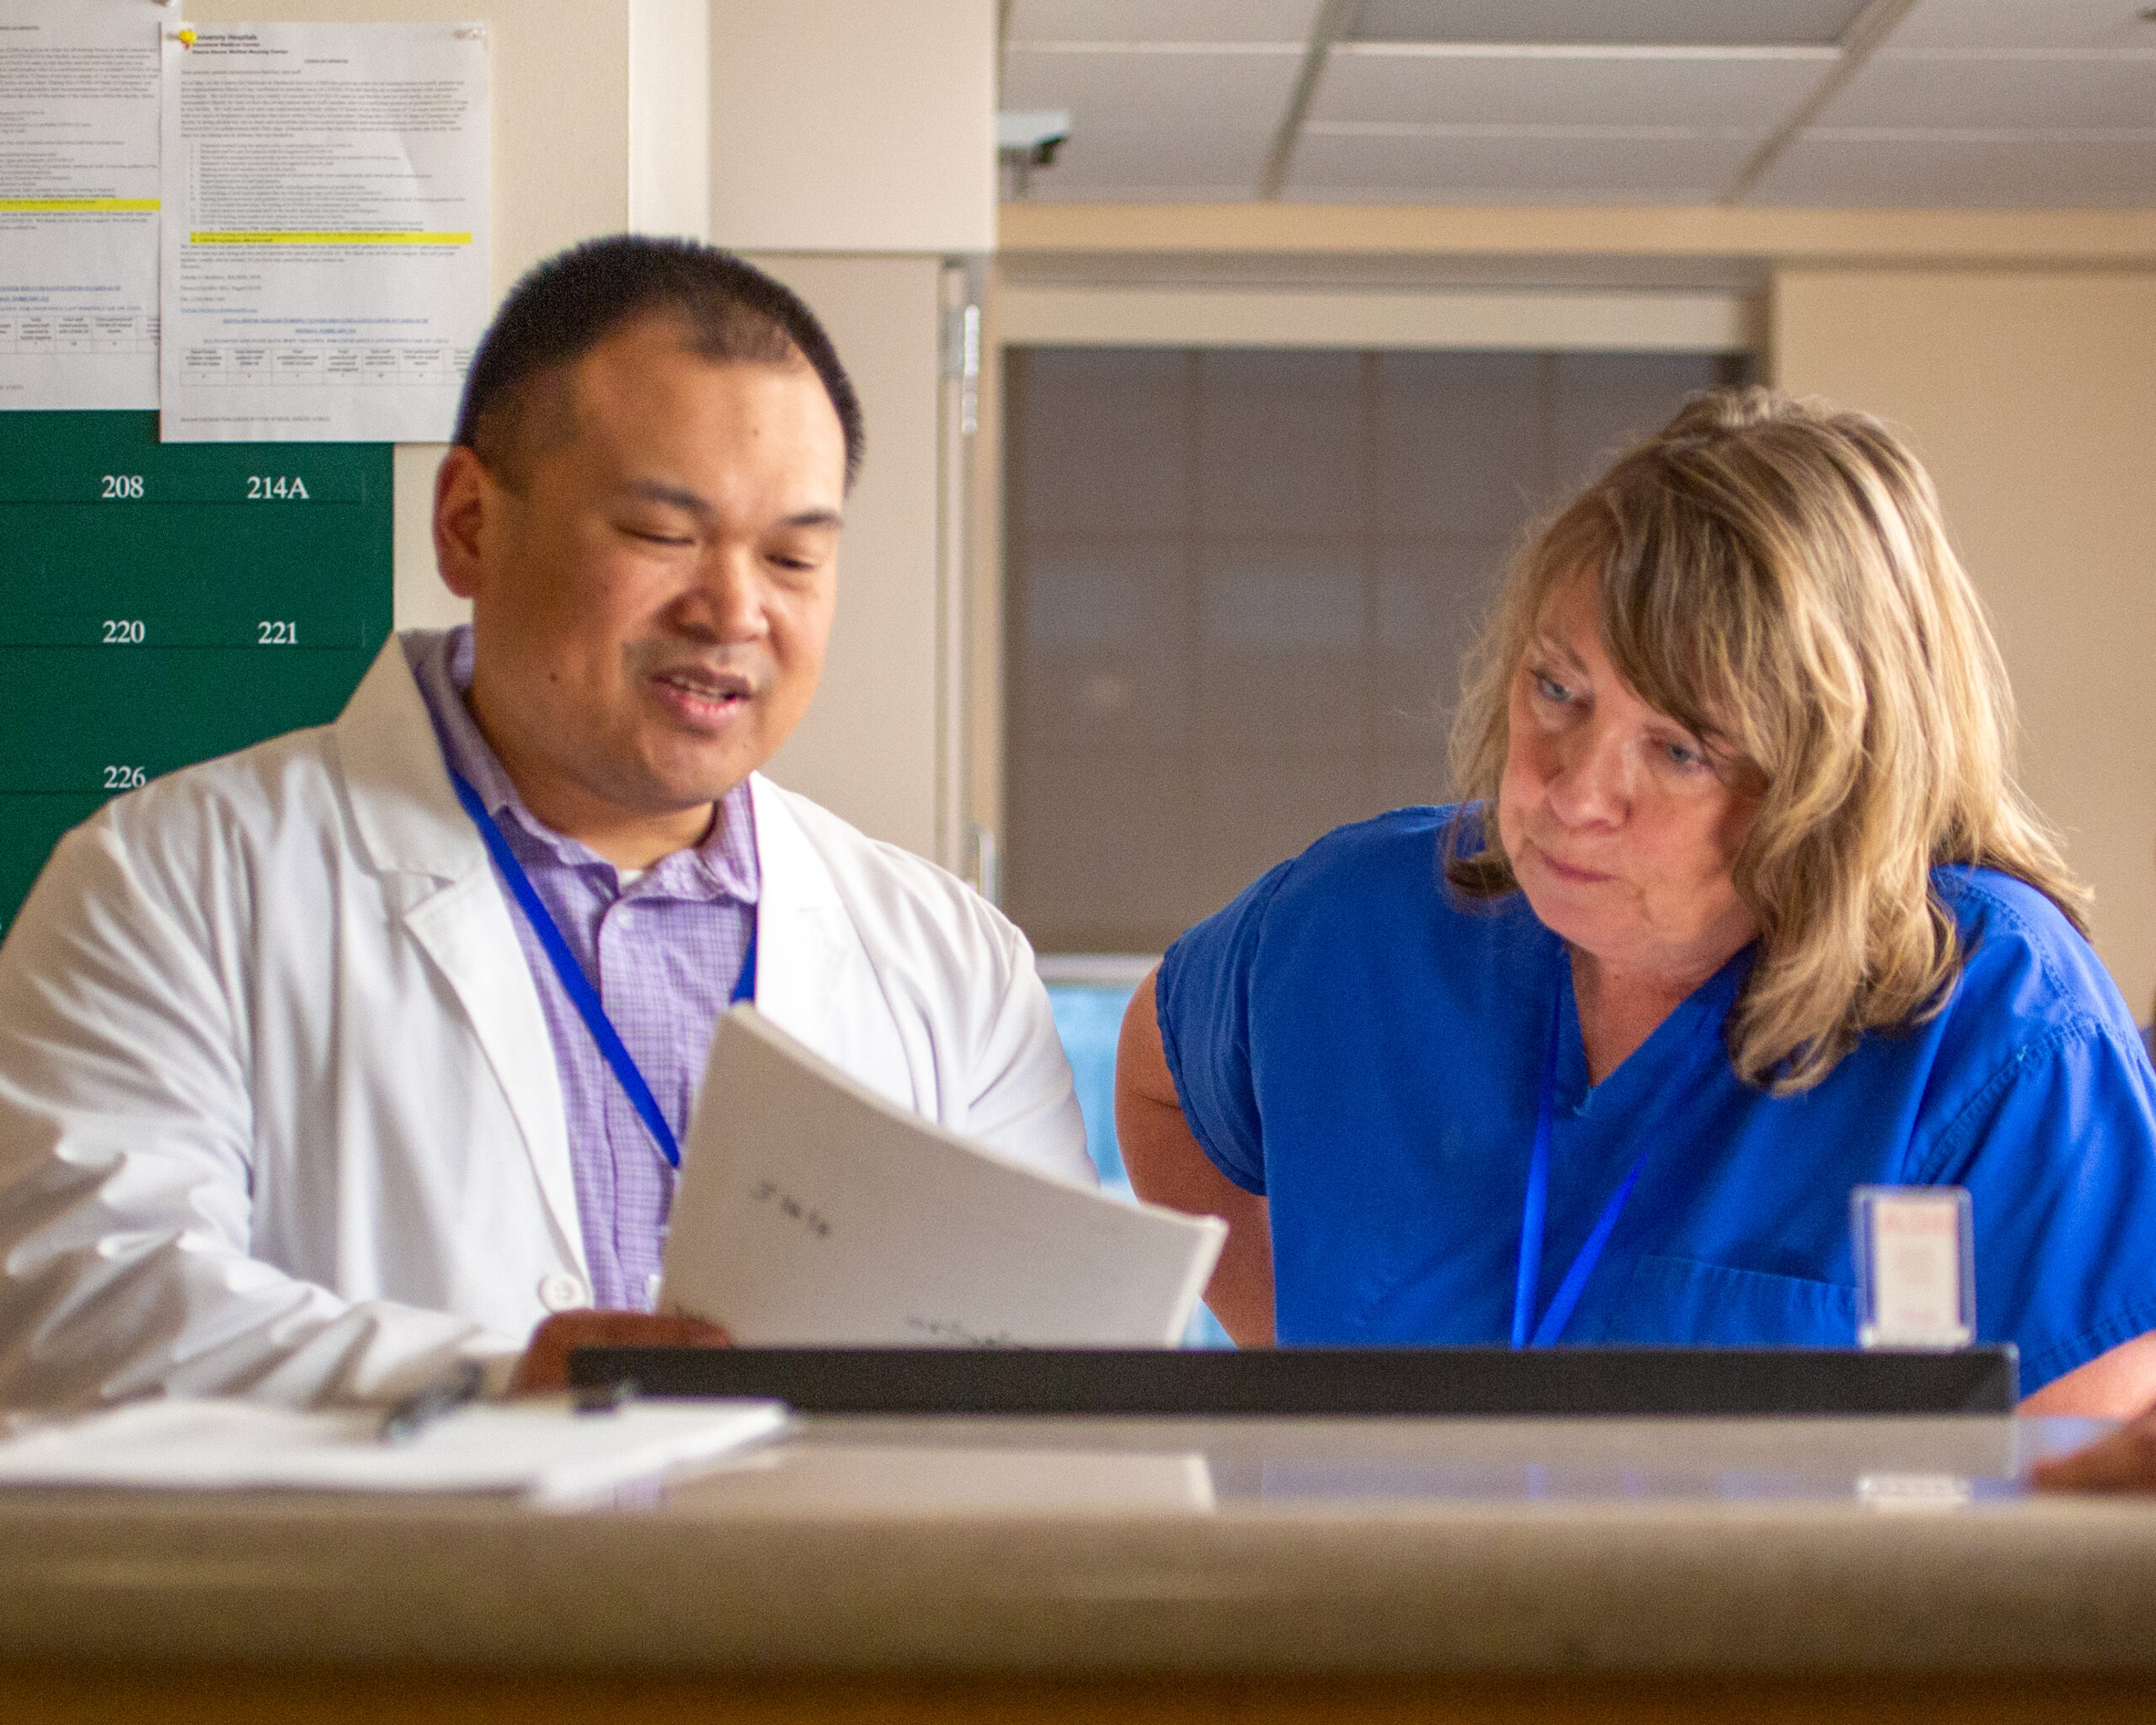 A health-system pharmacist and a health care professional reviewing a set of documents together.